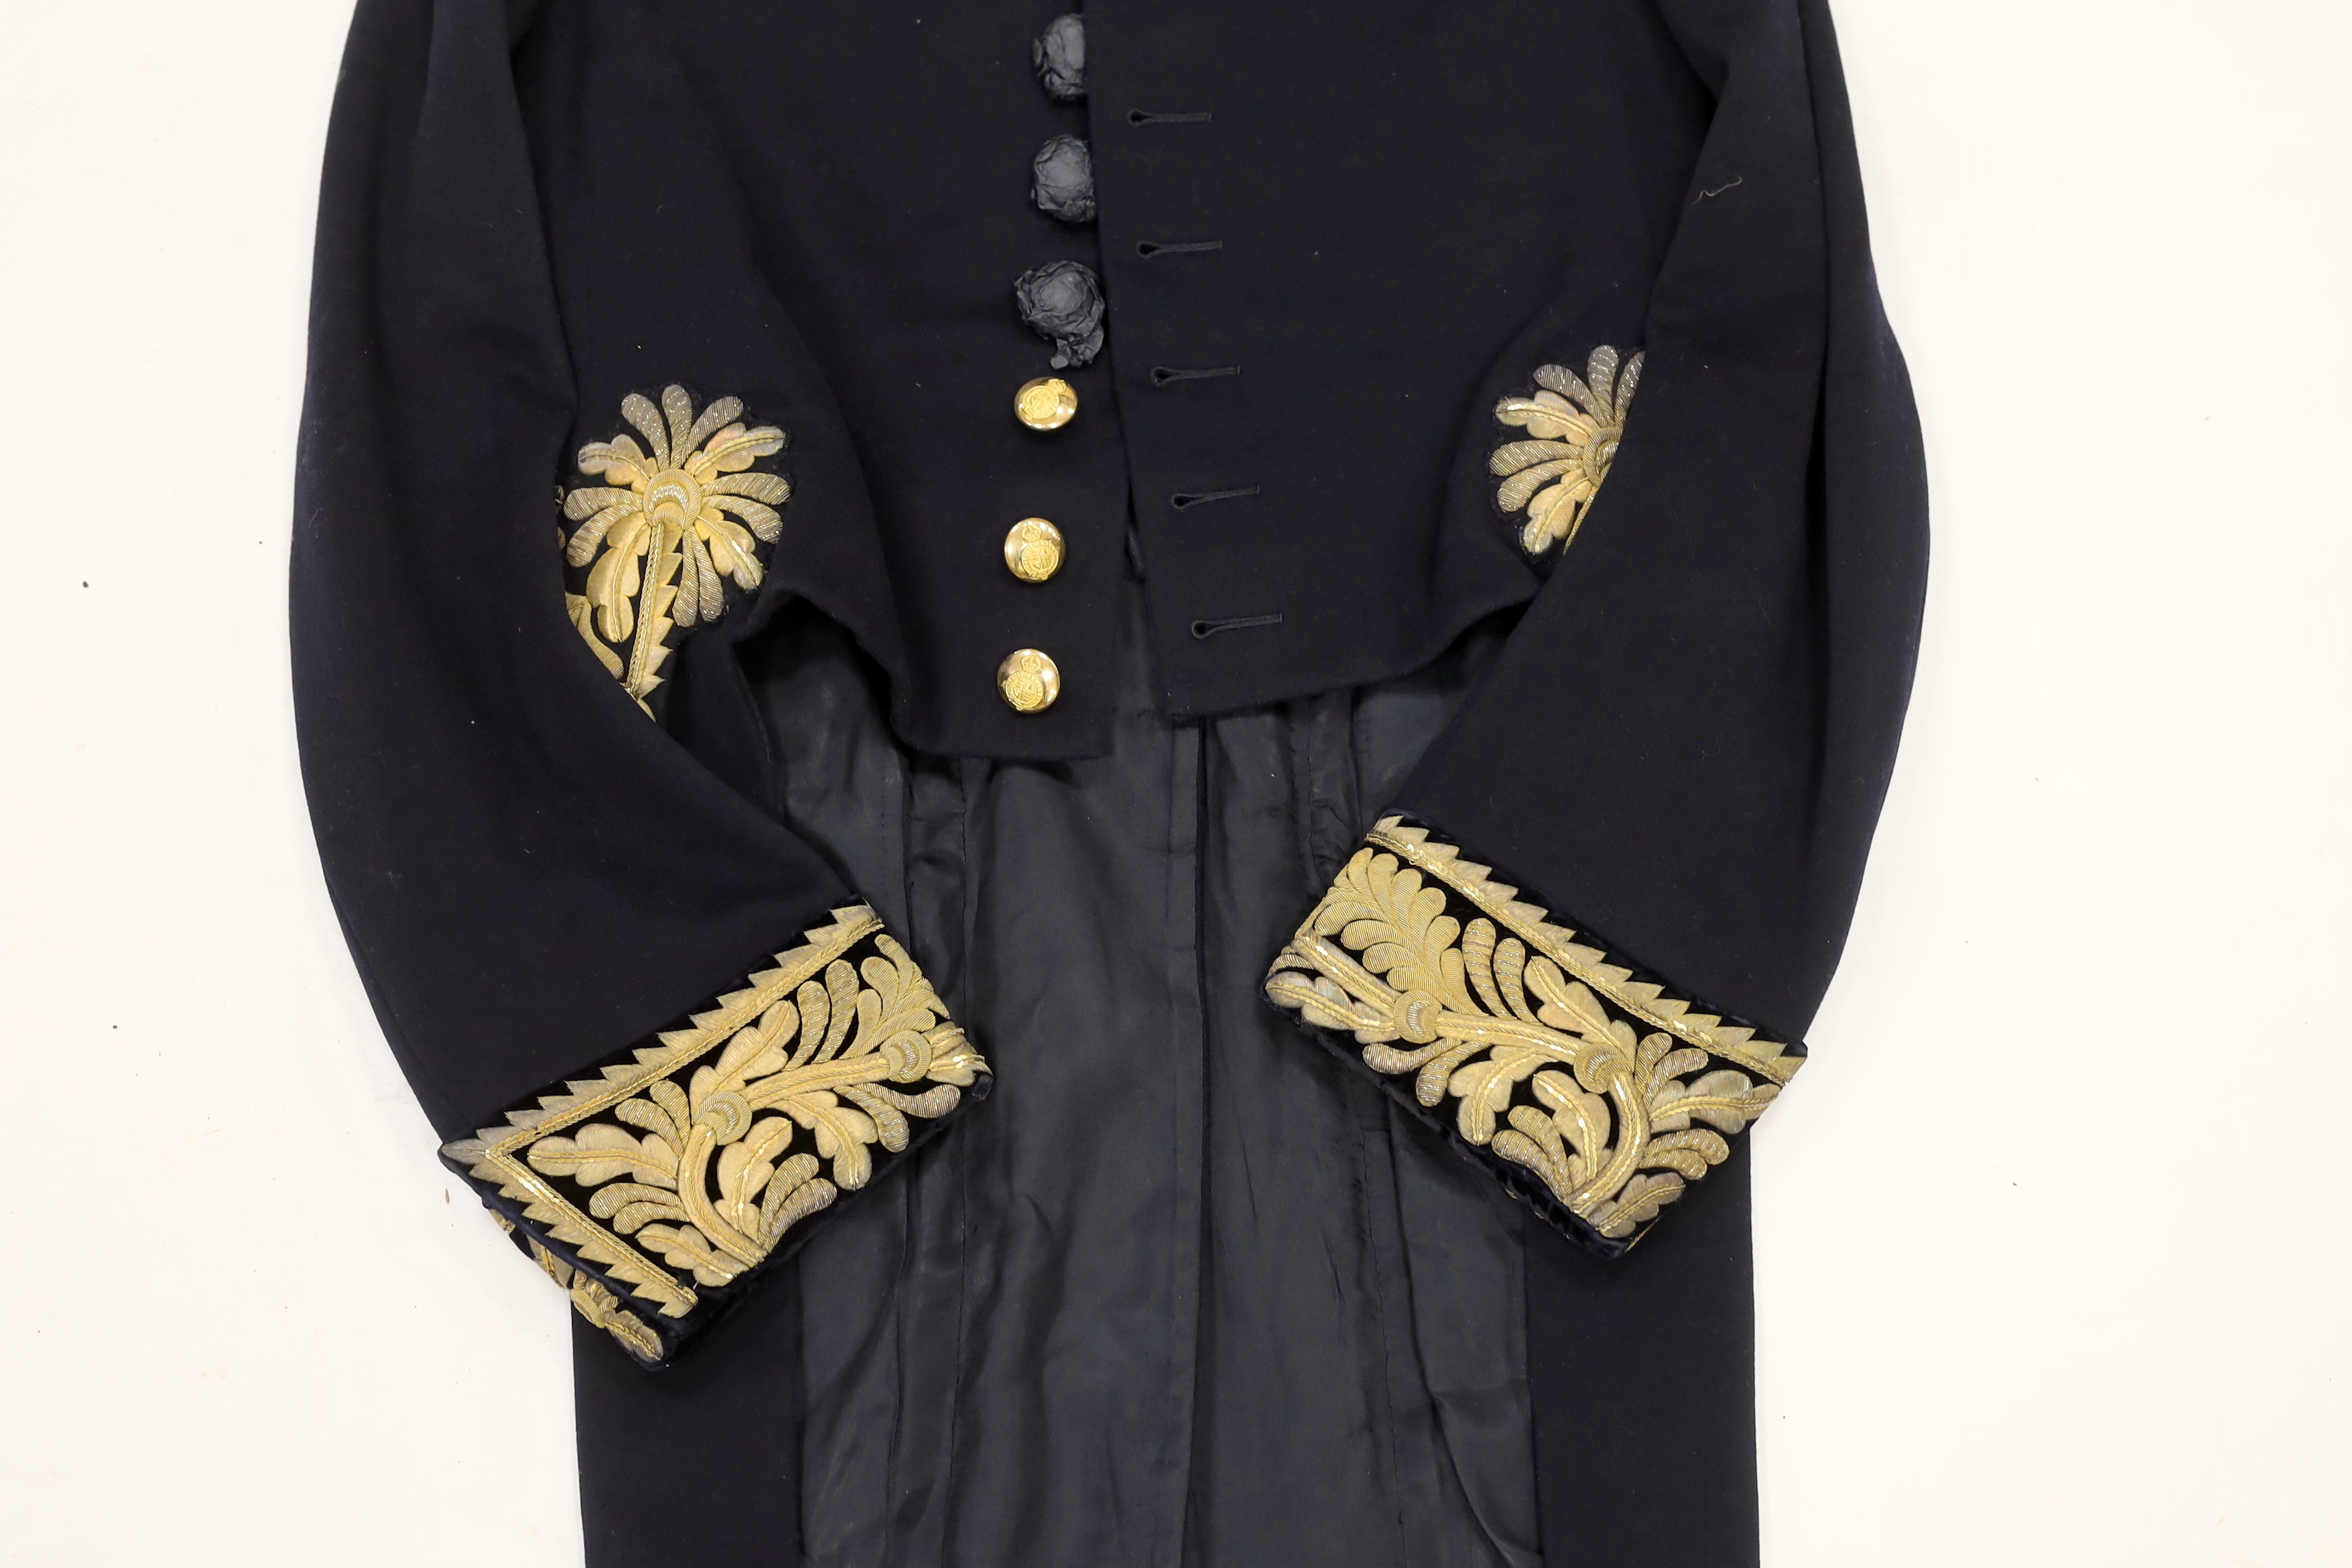 An early 20th century Royal Court tail coat or levee dress with gilt embroidery to collar and cuffs